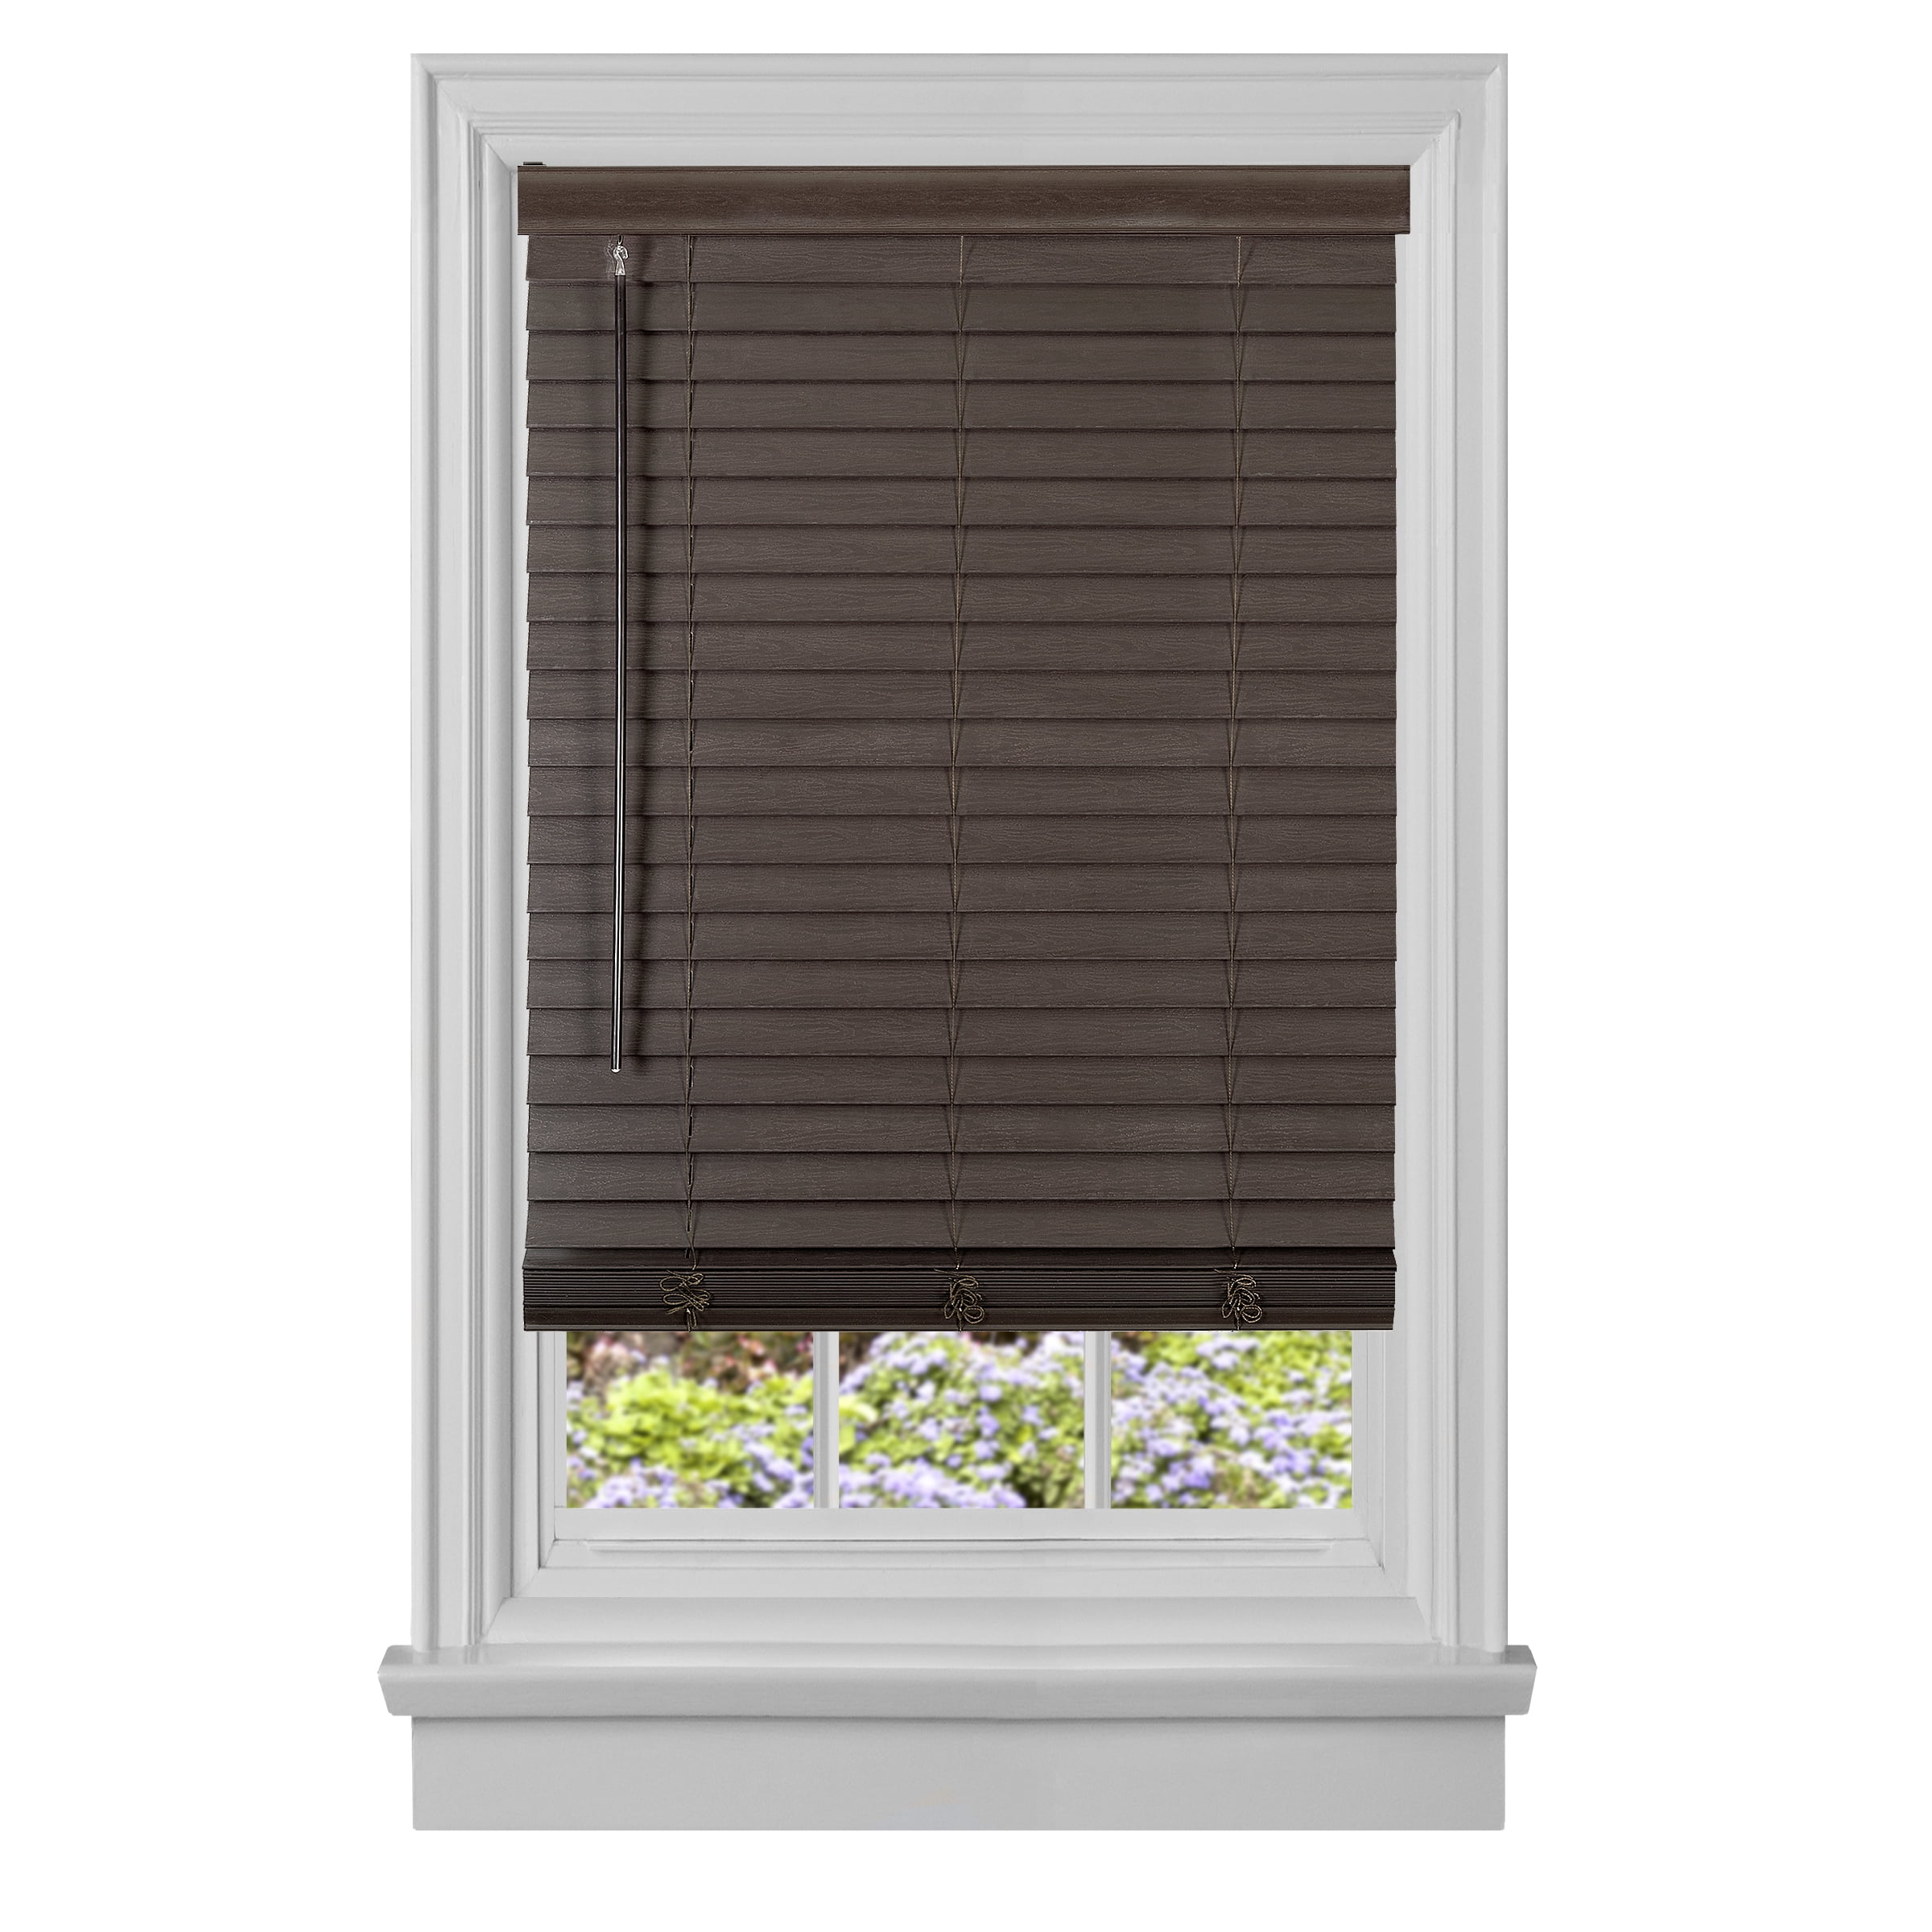 Picture of Achim MFG239MH02 39 x 64 in. Cordless GII Madera Falsa 2 in. Faux Wood Plantation Blind - Mahogany